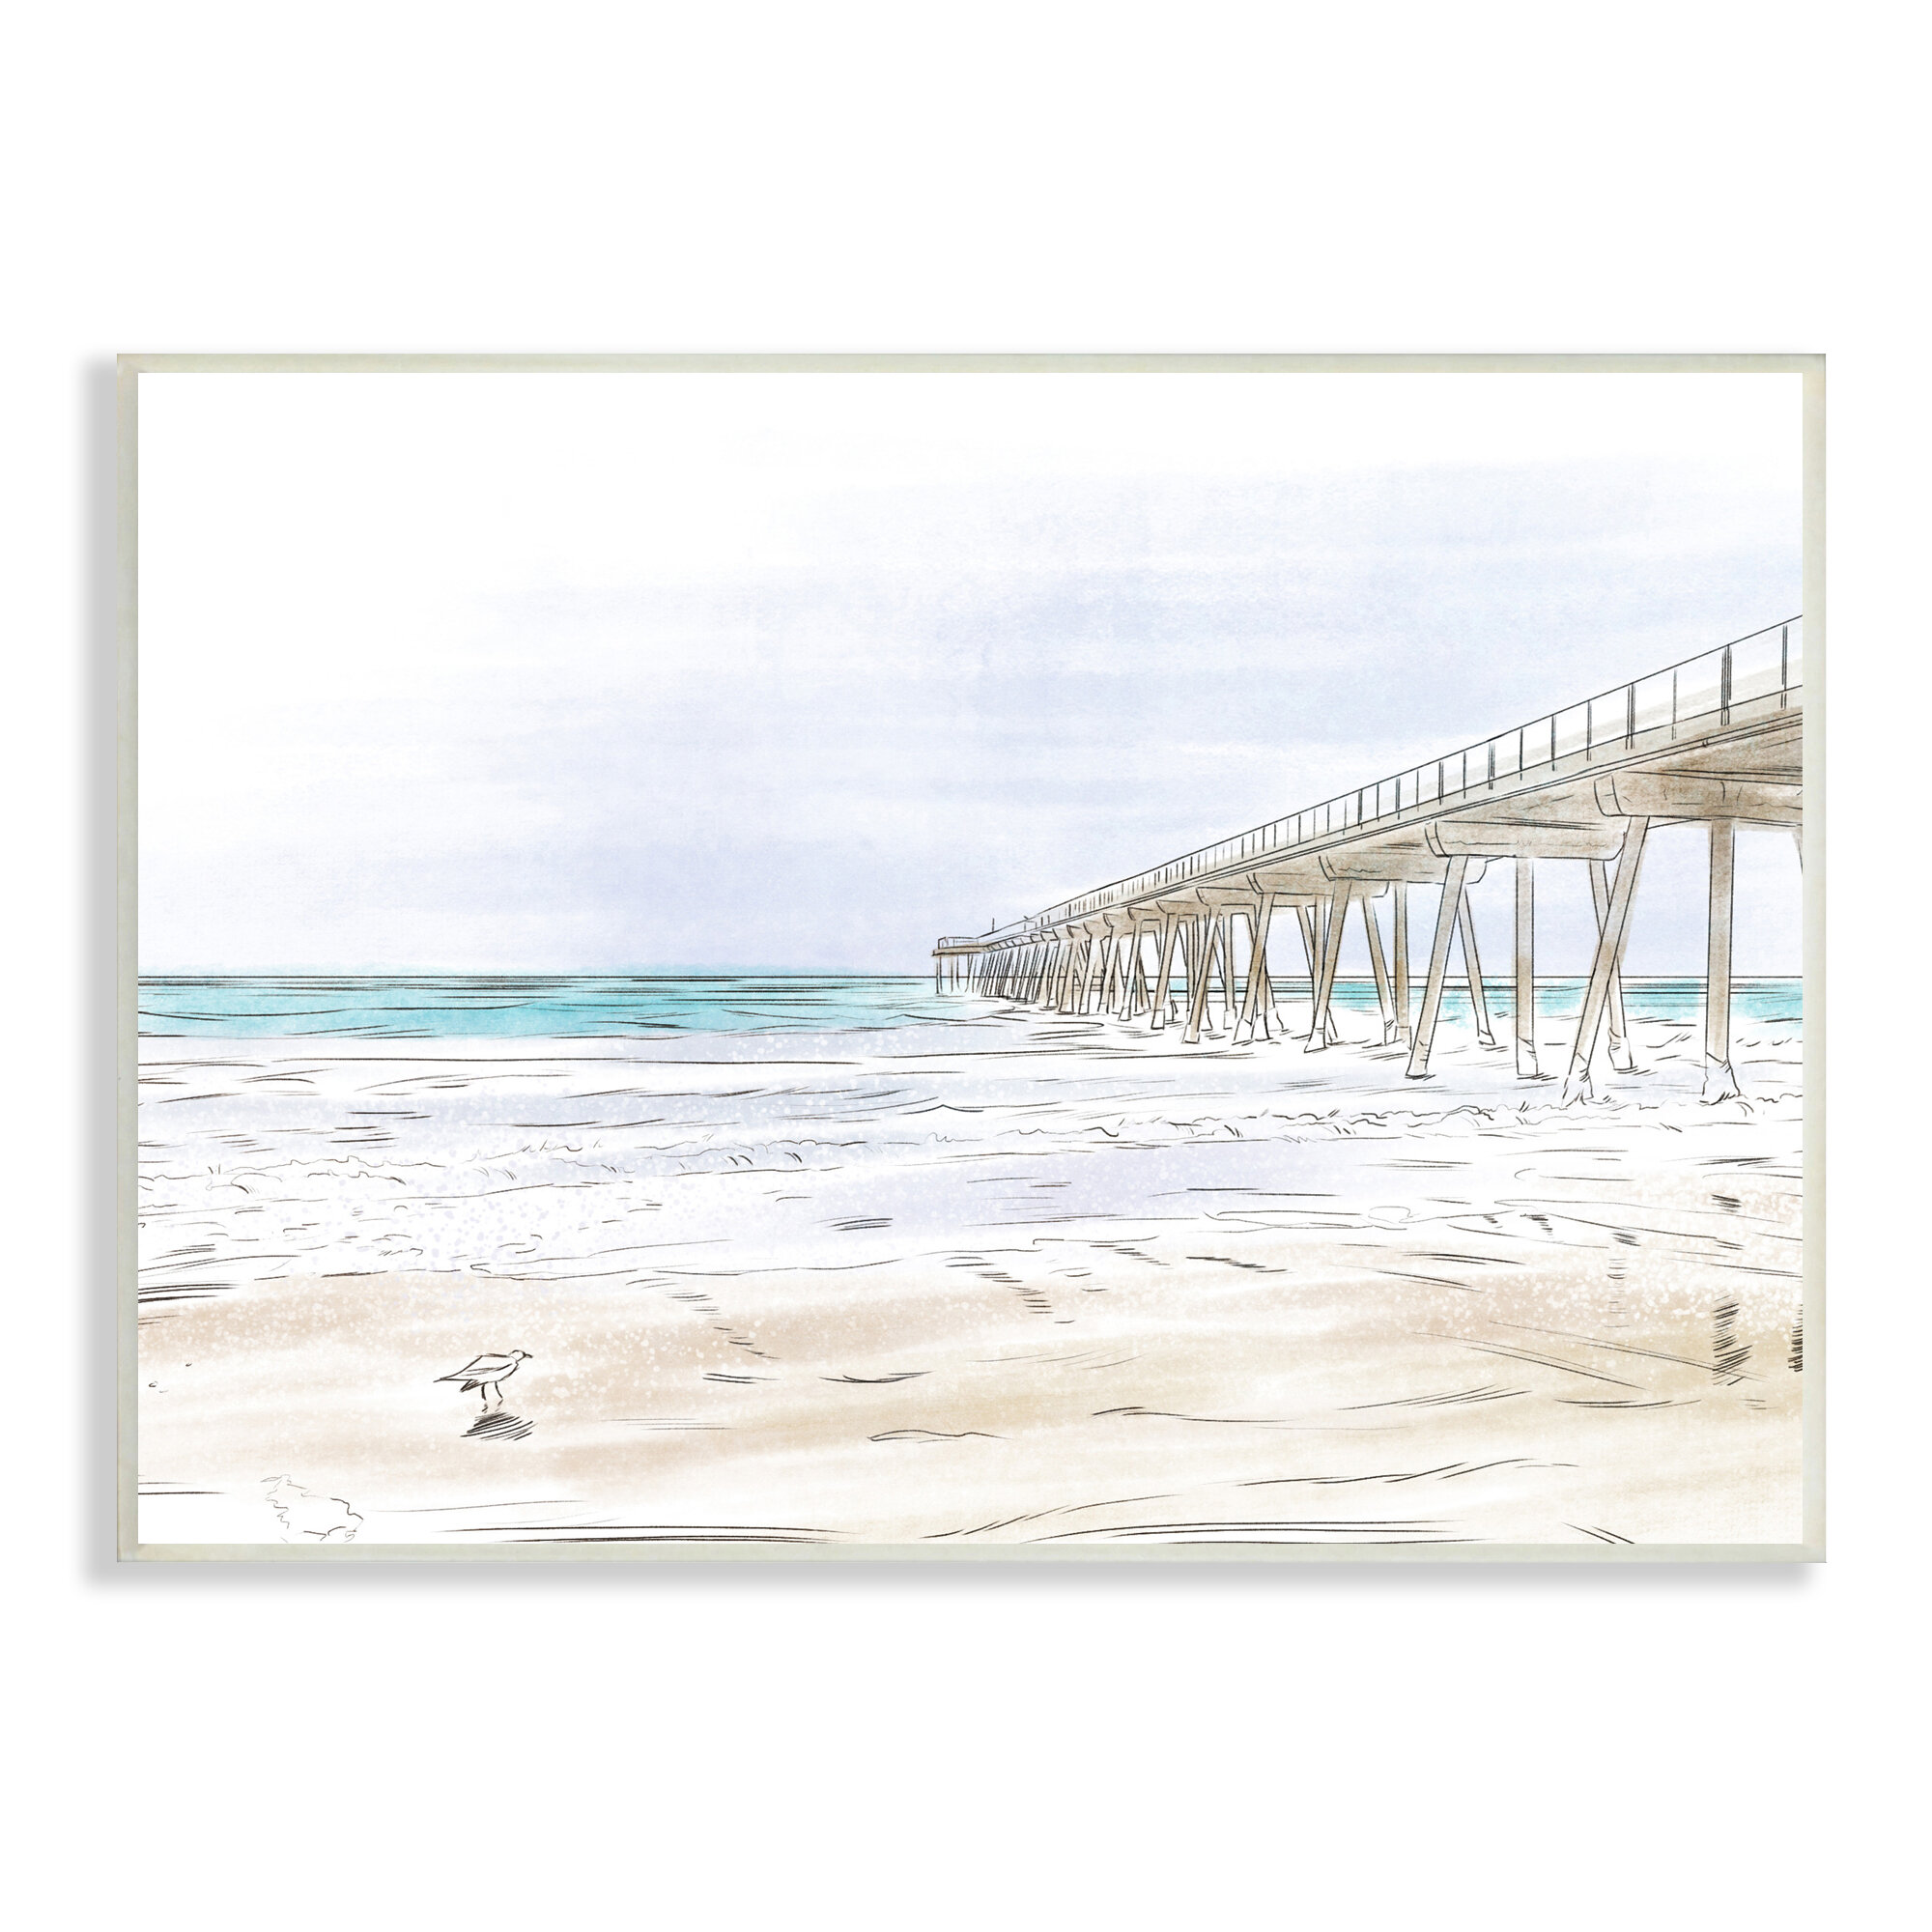 Tall Wharf Over Beach Coast Detailed Linework Landscape by Bill Carson -  Graphic Art on Canvas